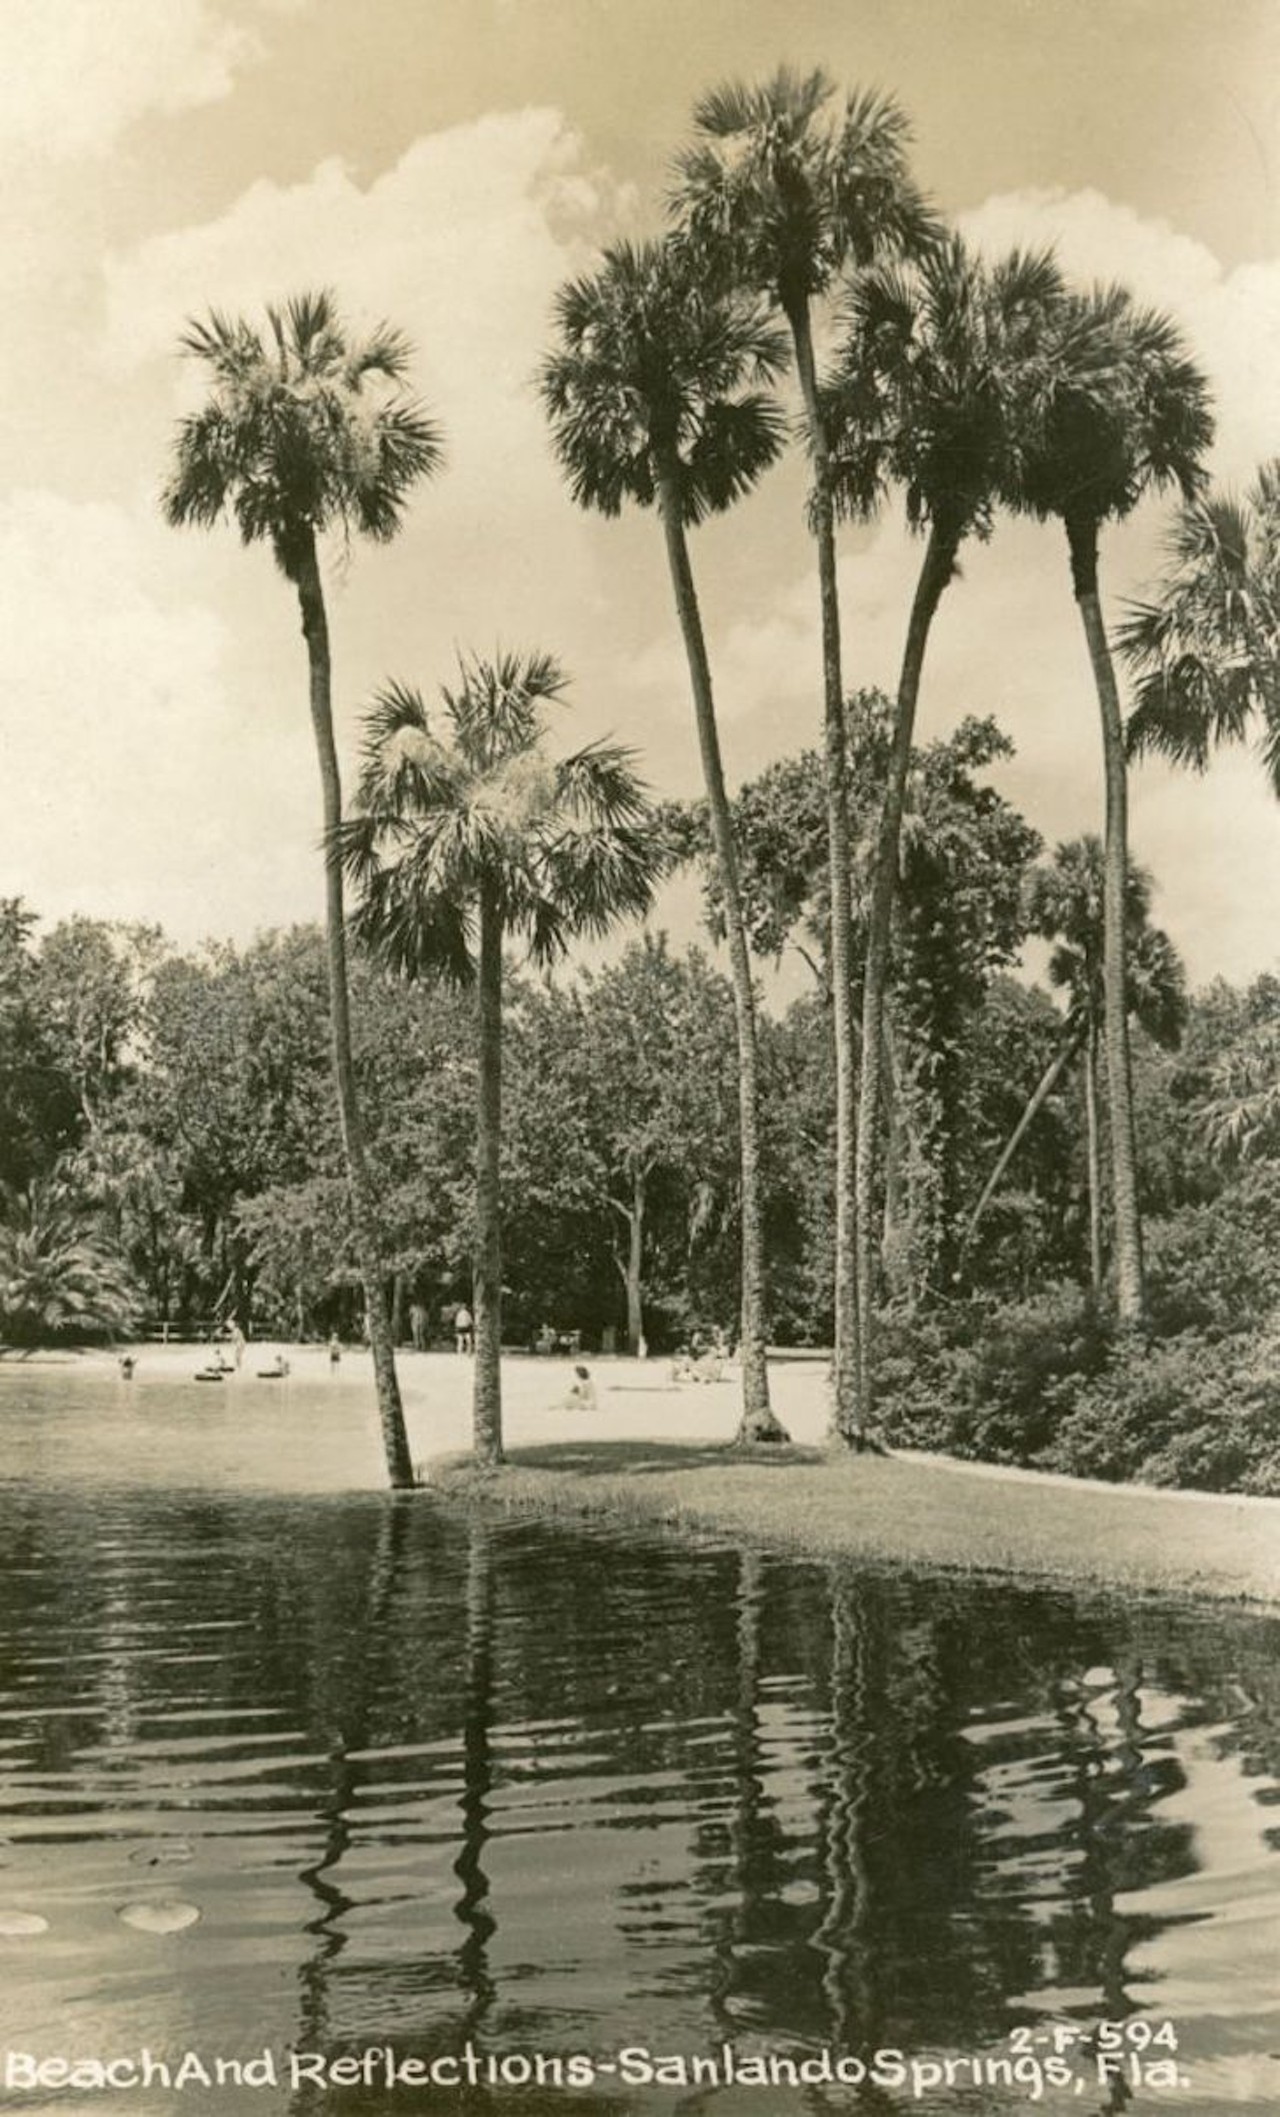 Beach and reflections - Sanlando Springs, likely after 1925.